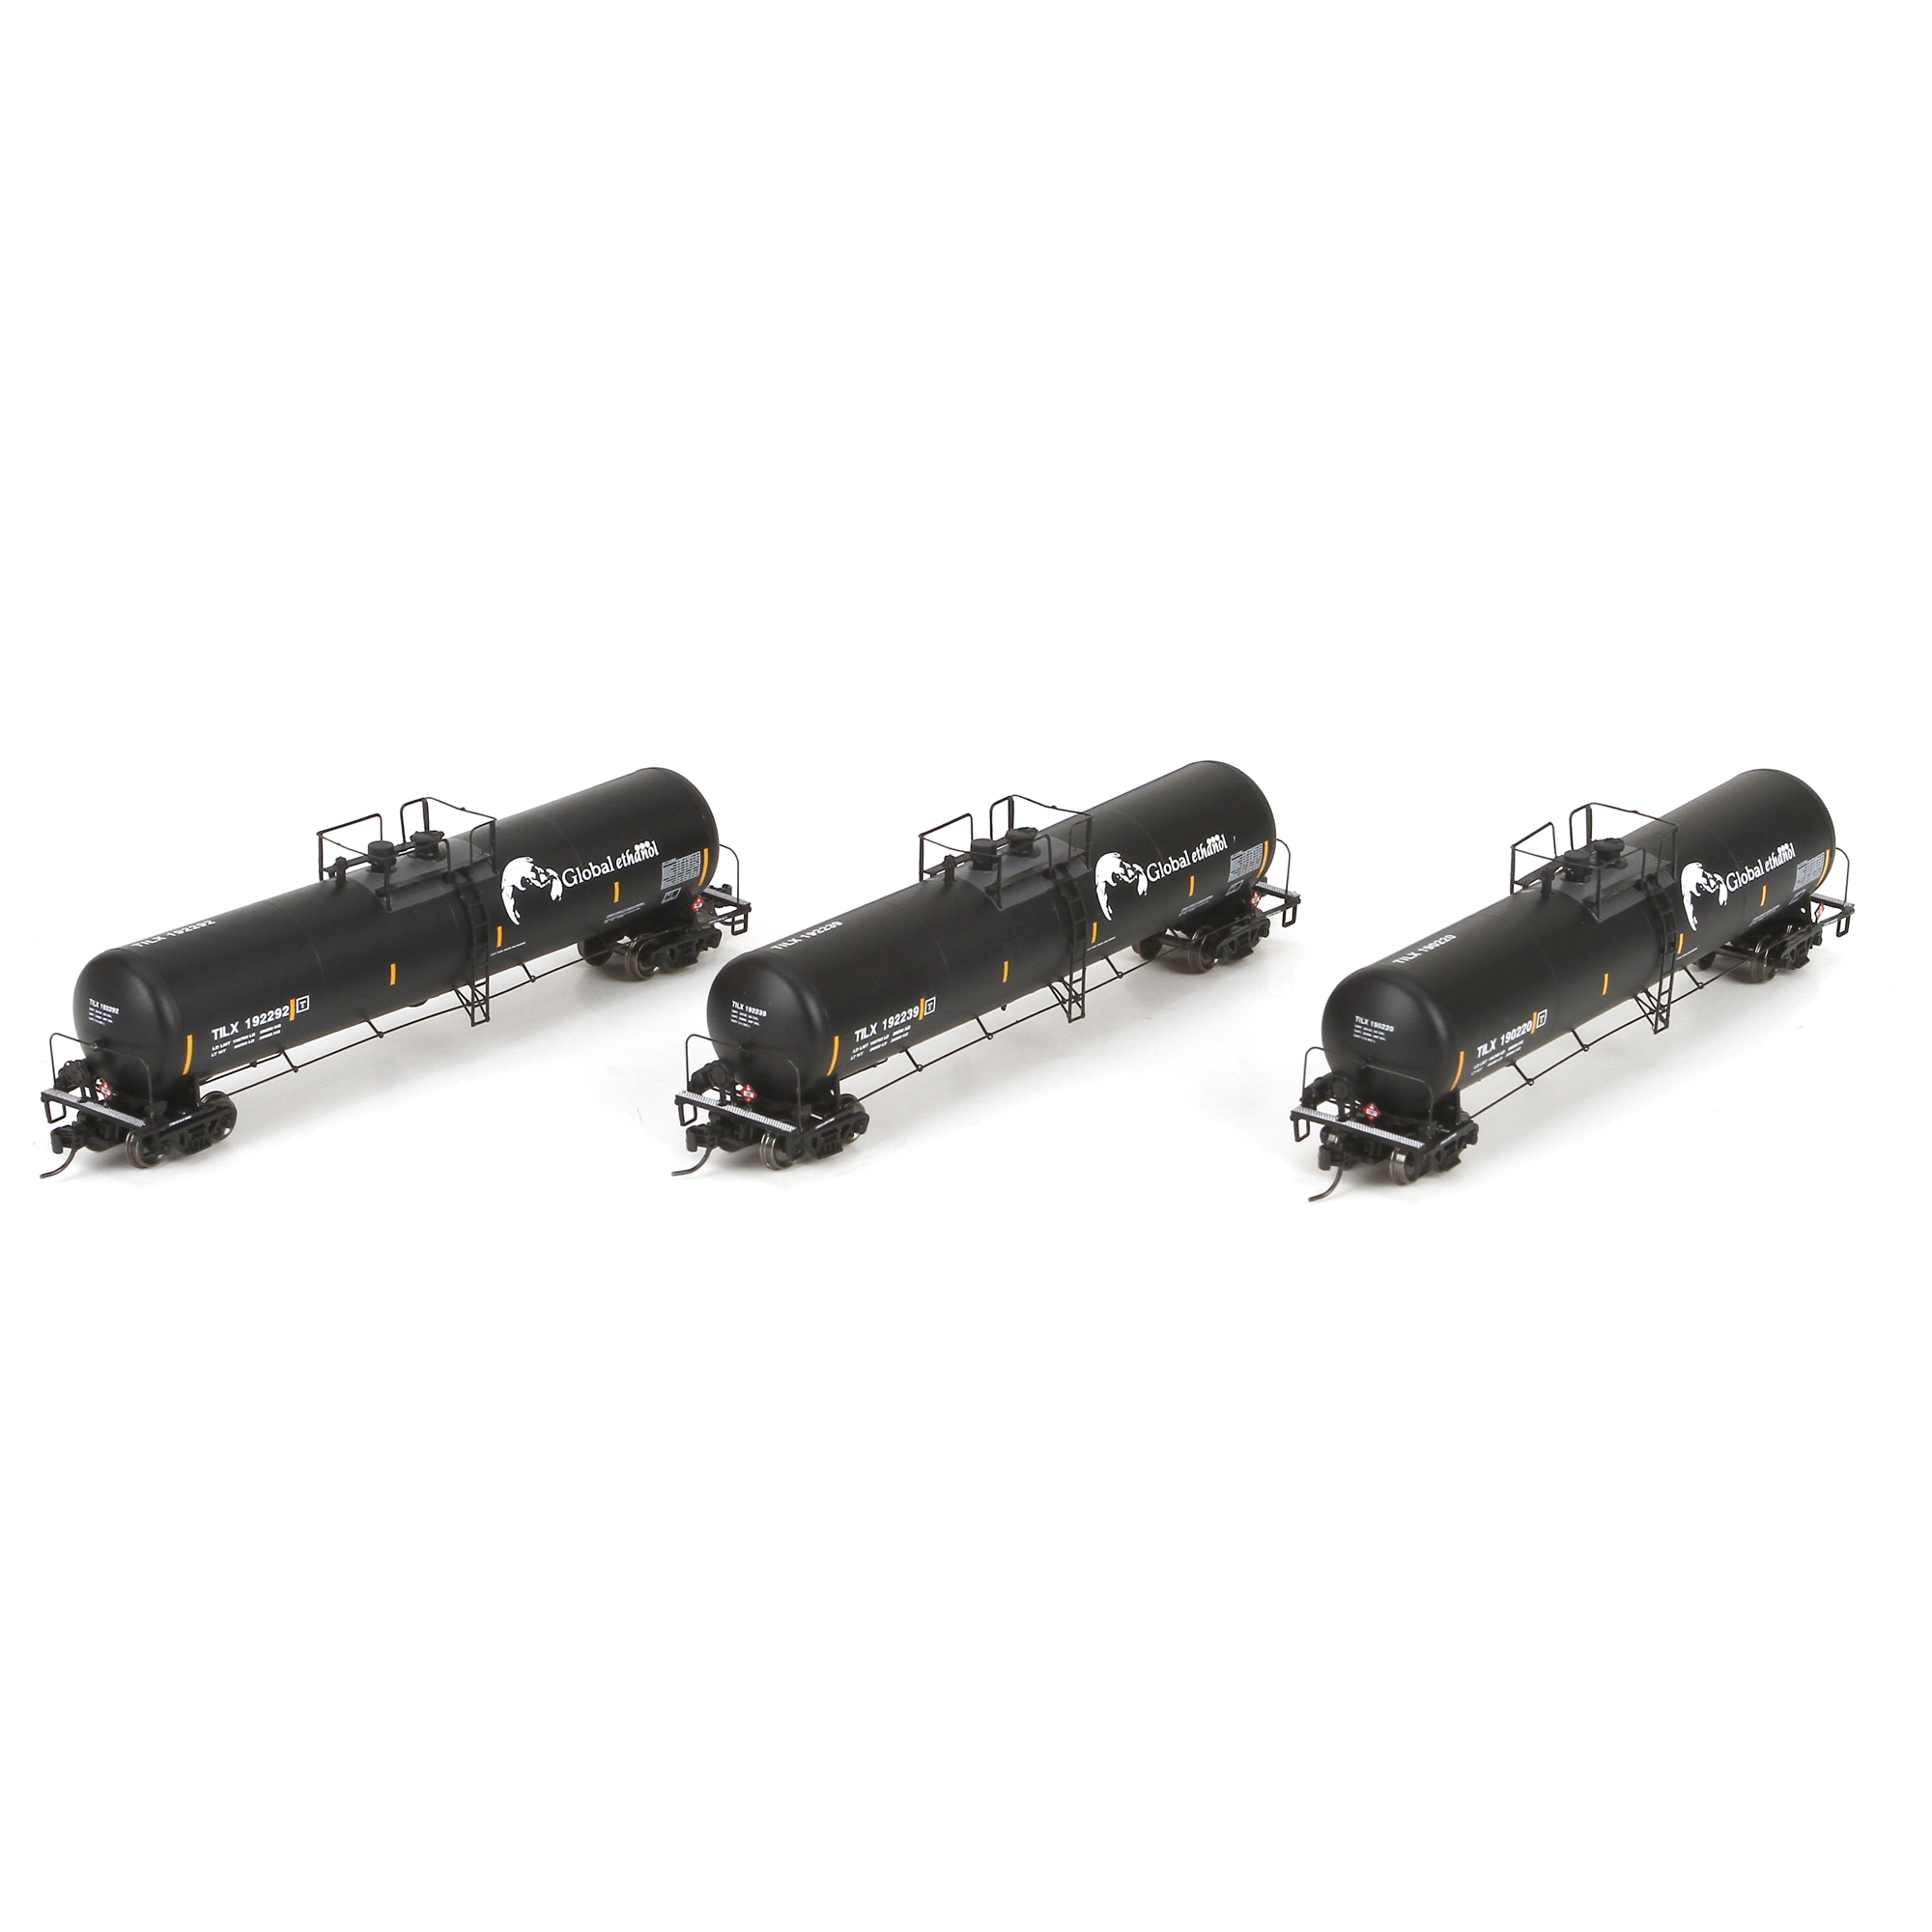 N Scale - Athearn - 24499-PART - Tank Car, Single Dome, UTLX 30K Ethanol - Renewable Products - 196002